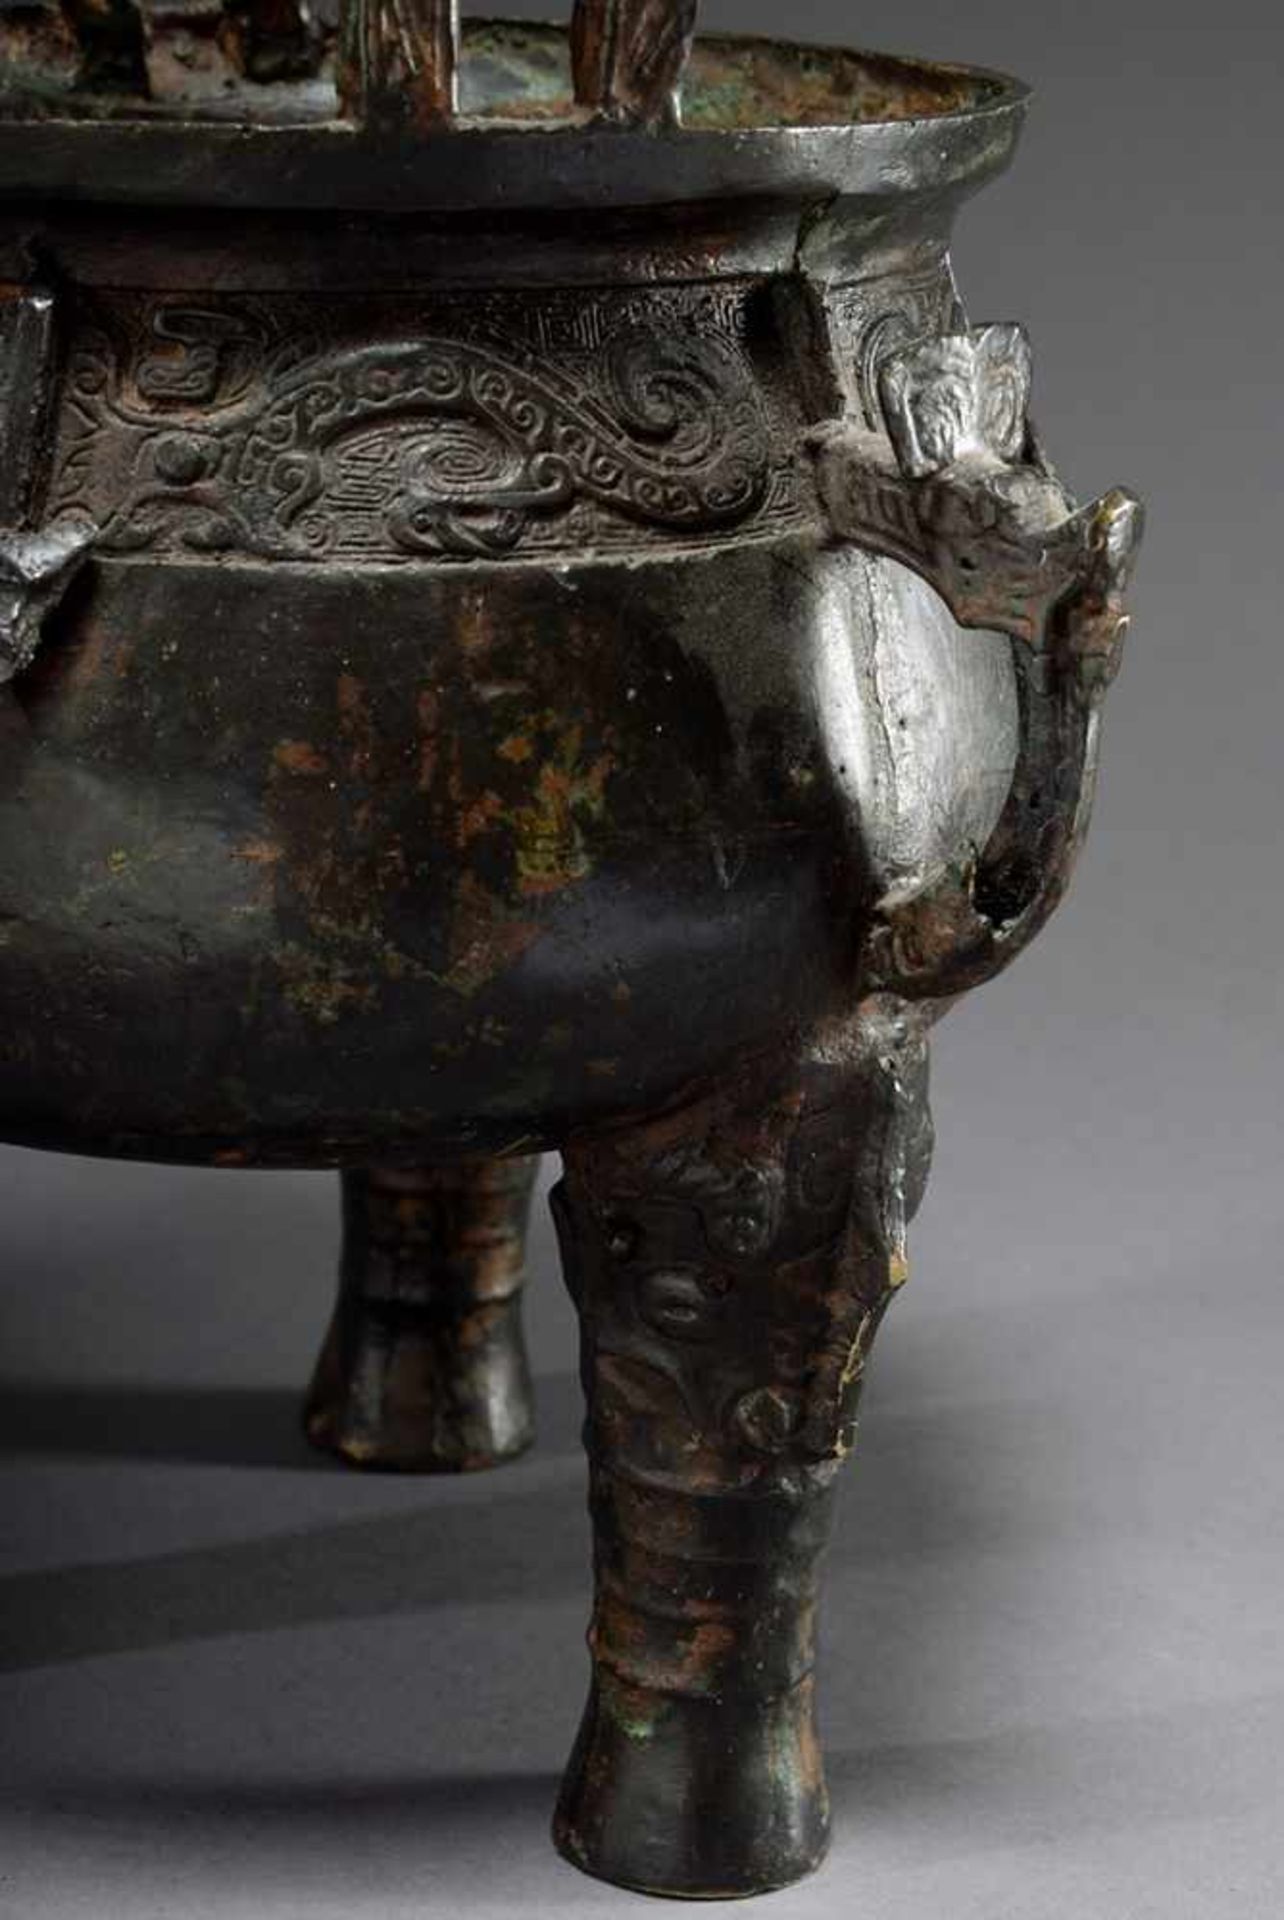 Bronze ritual vessel of the type "Ding" with archaic ornamental frieze on 3 legs, China 18th/19th - Image 3 of 10